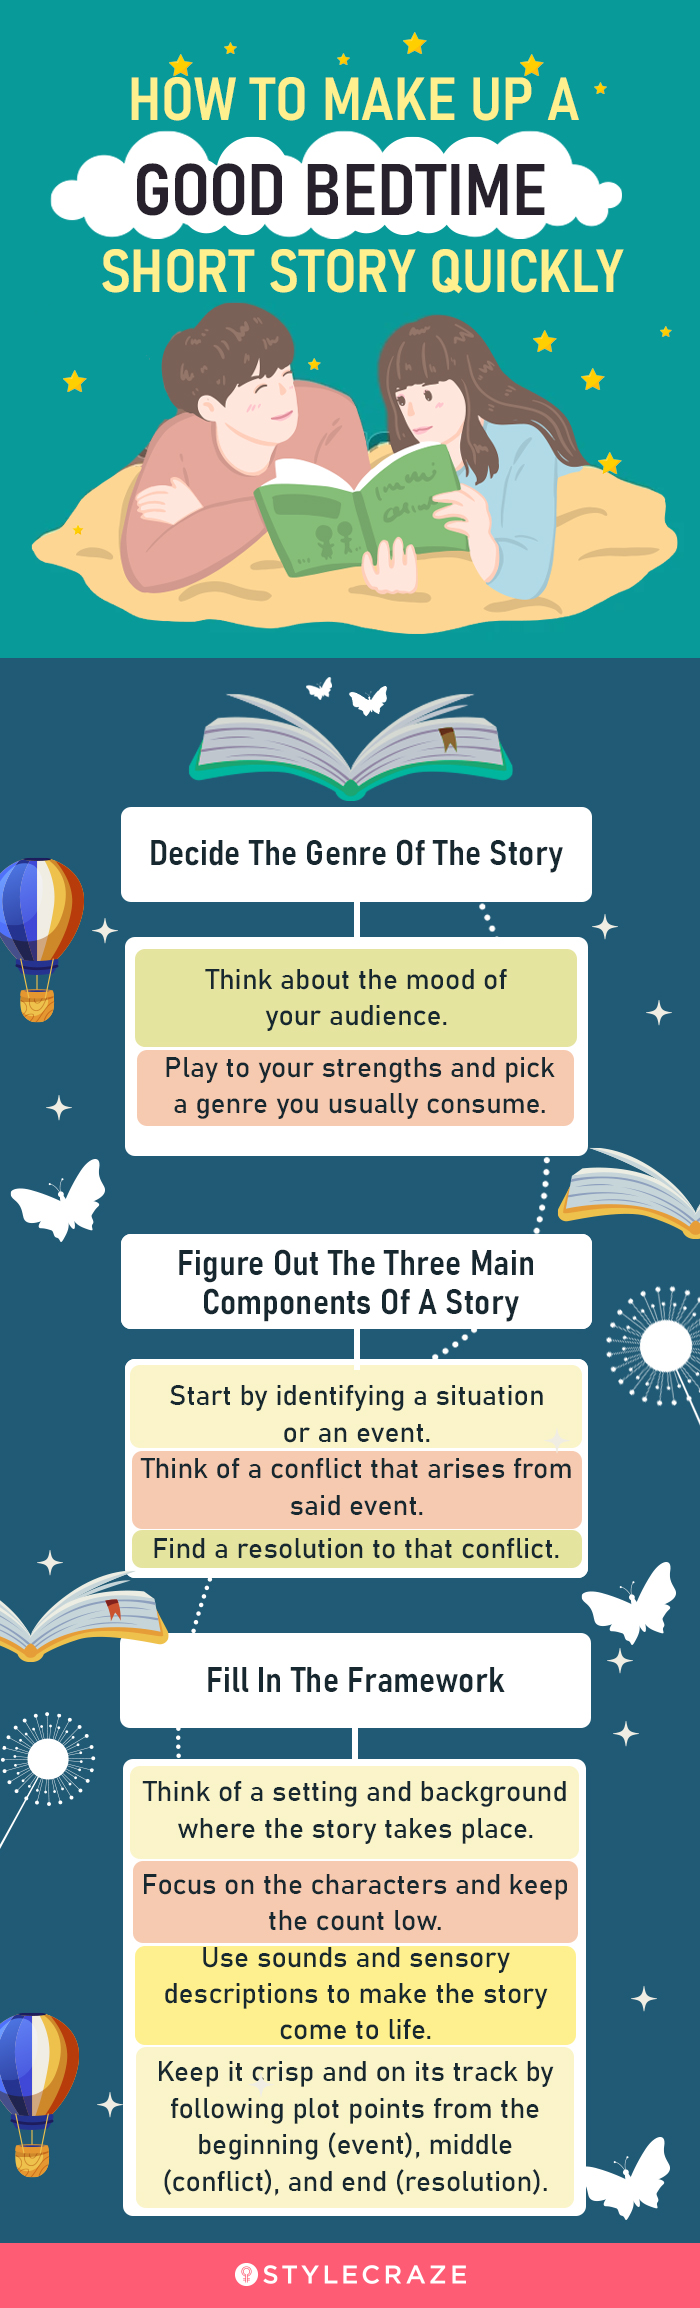 how to make up a good bedtime short story quickly [infographic]